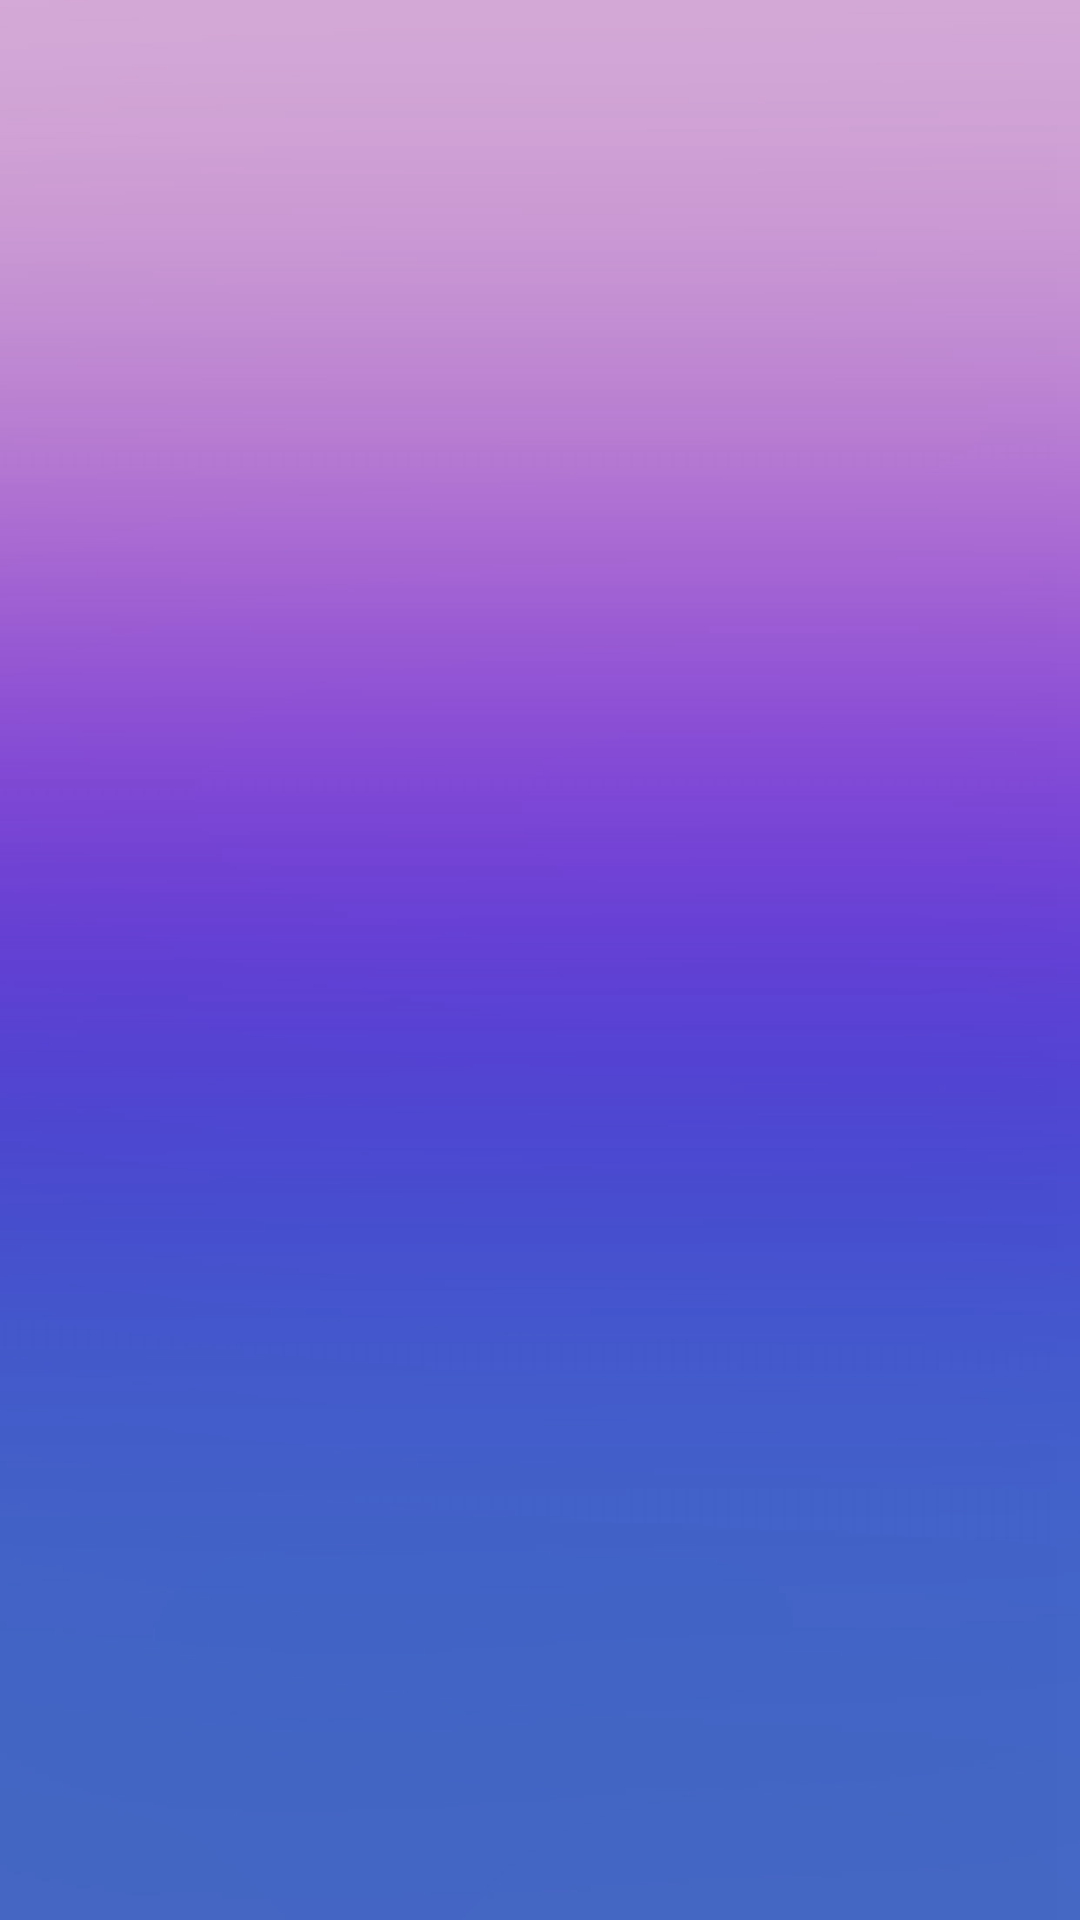 Blue And Purple Ombre Background Wallpaper Teahub Io